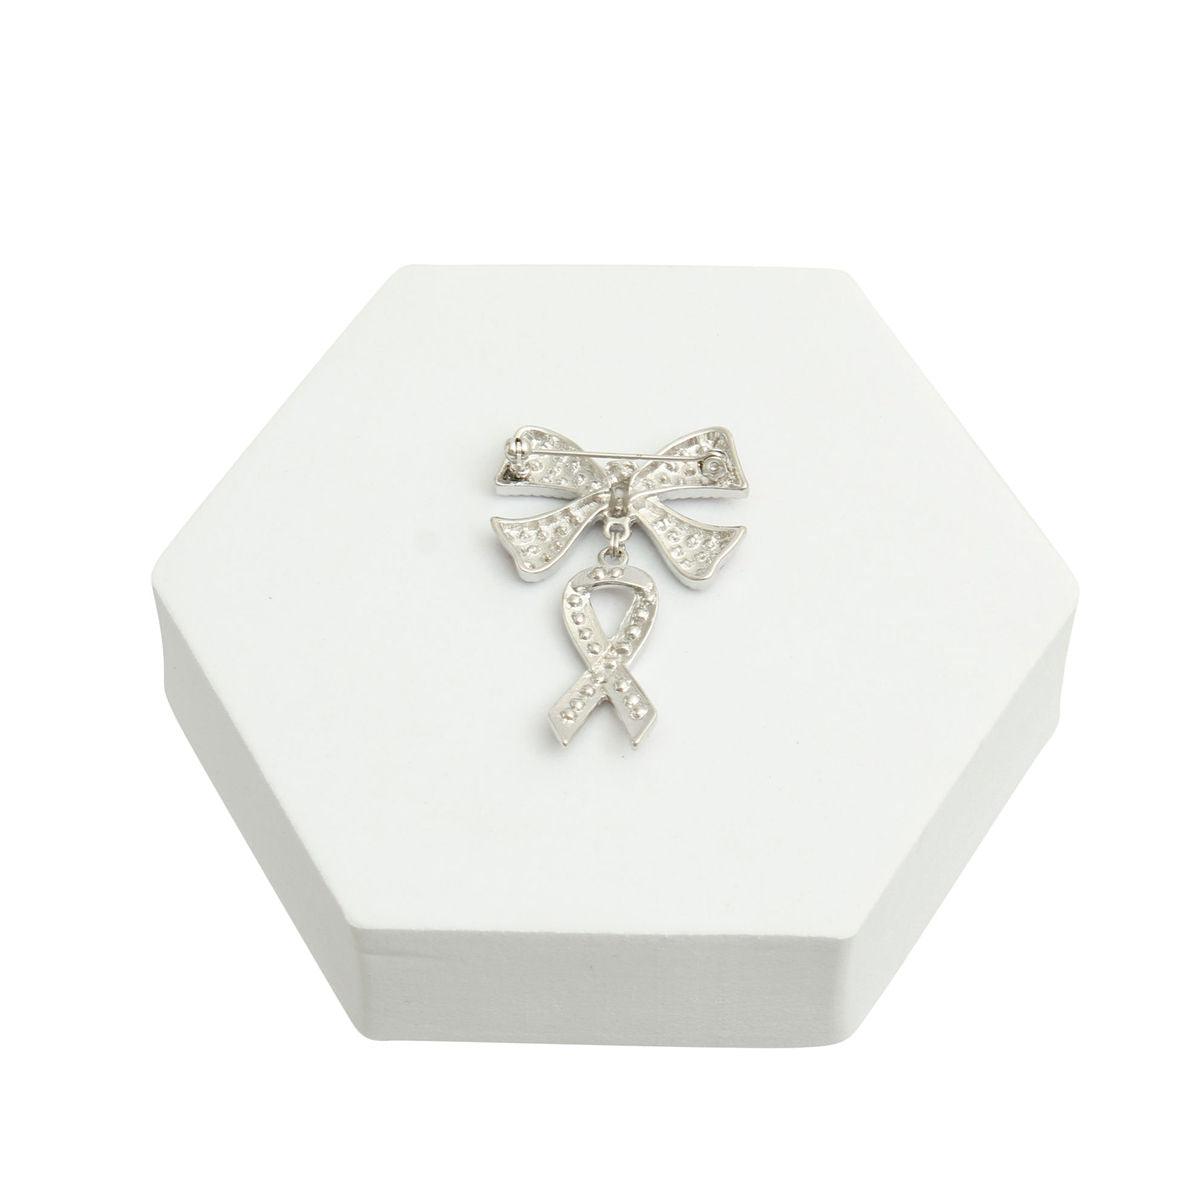 Stylish Silver Tone Lapel Pin with Double Pink Ribbon - Buy Today!